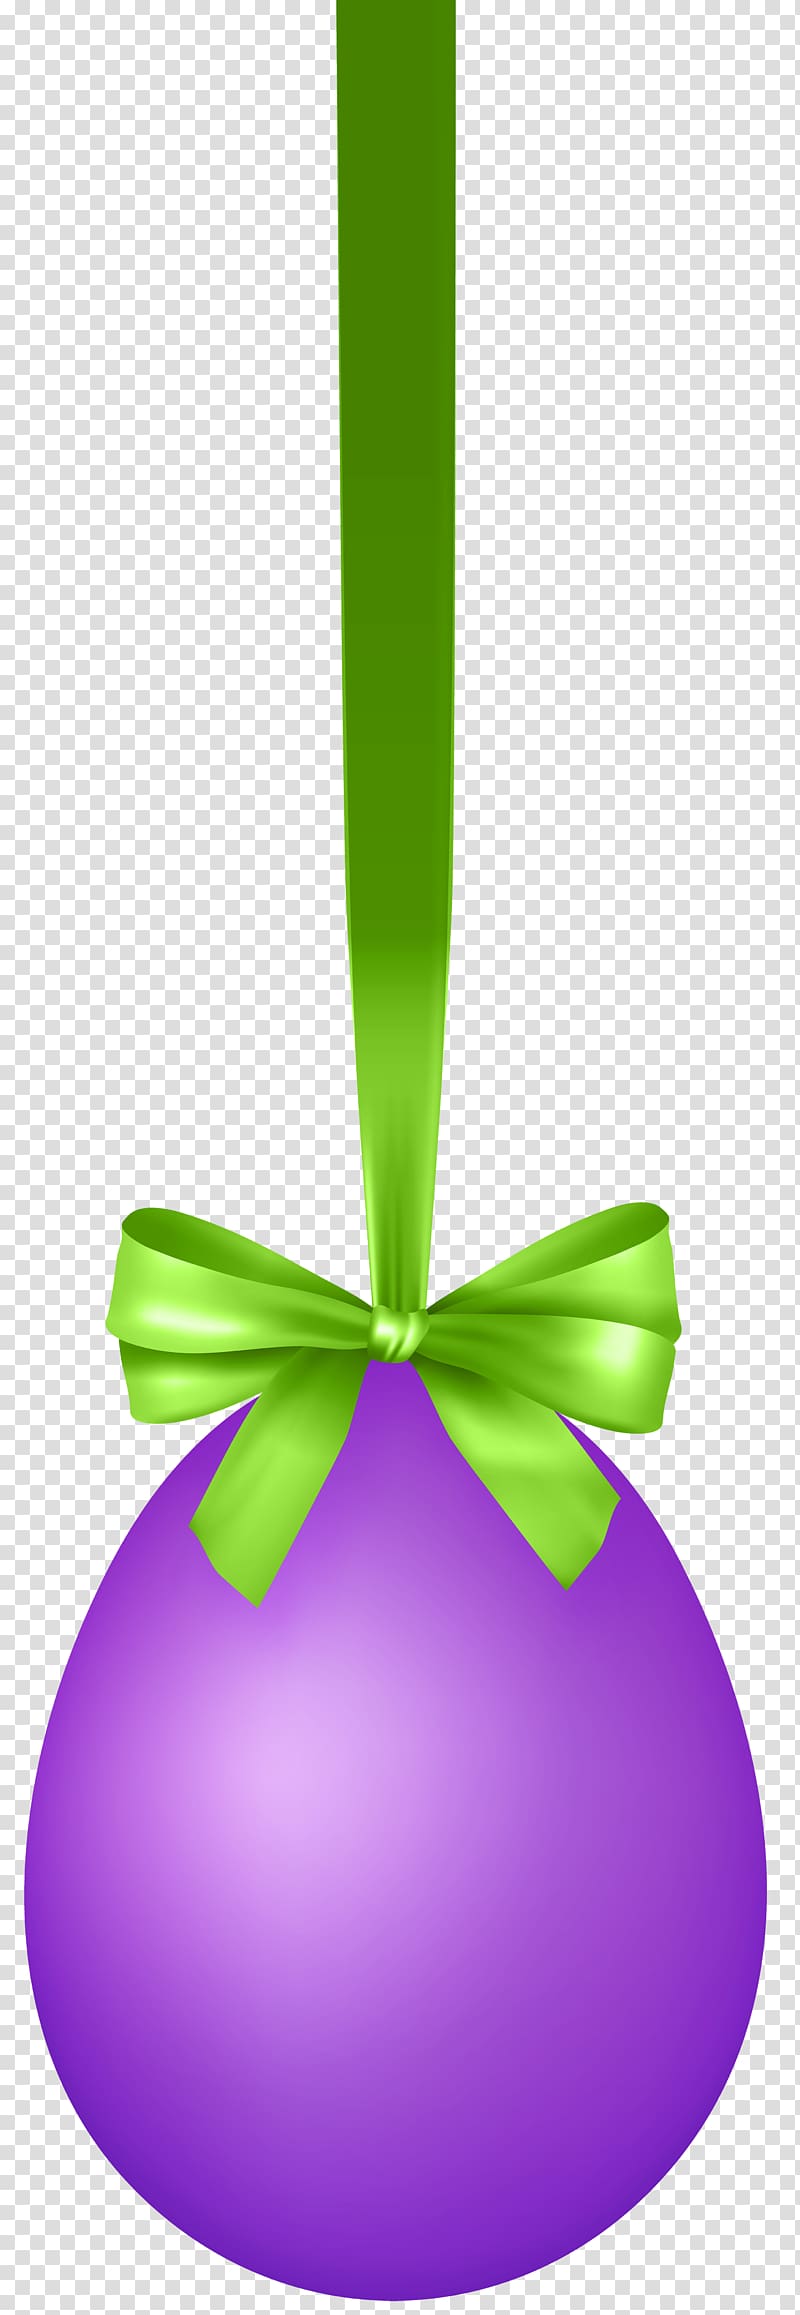 Leaf Green, Purple Hanging Easter Egg with Bow transparent background PNG clipart